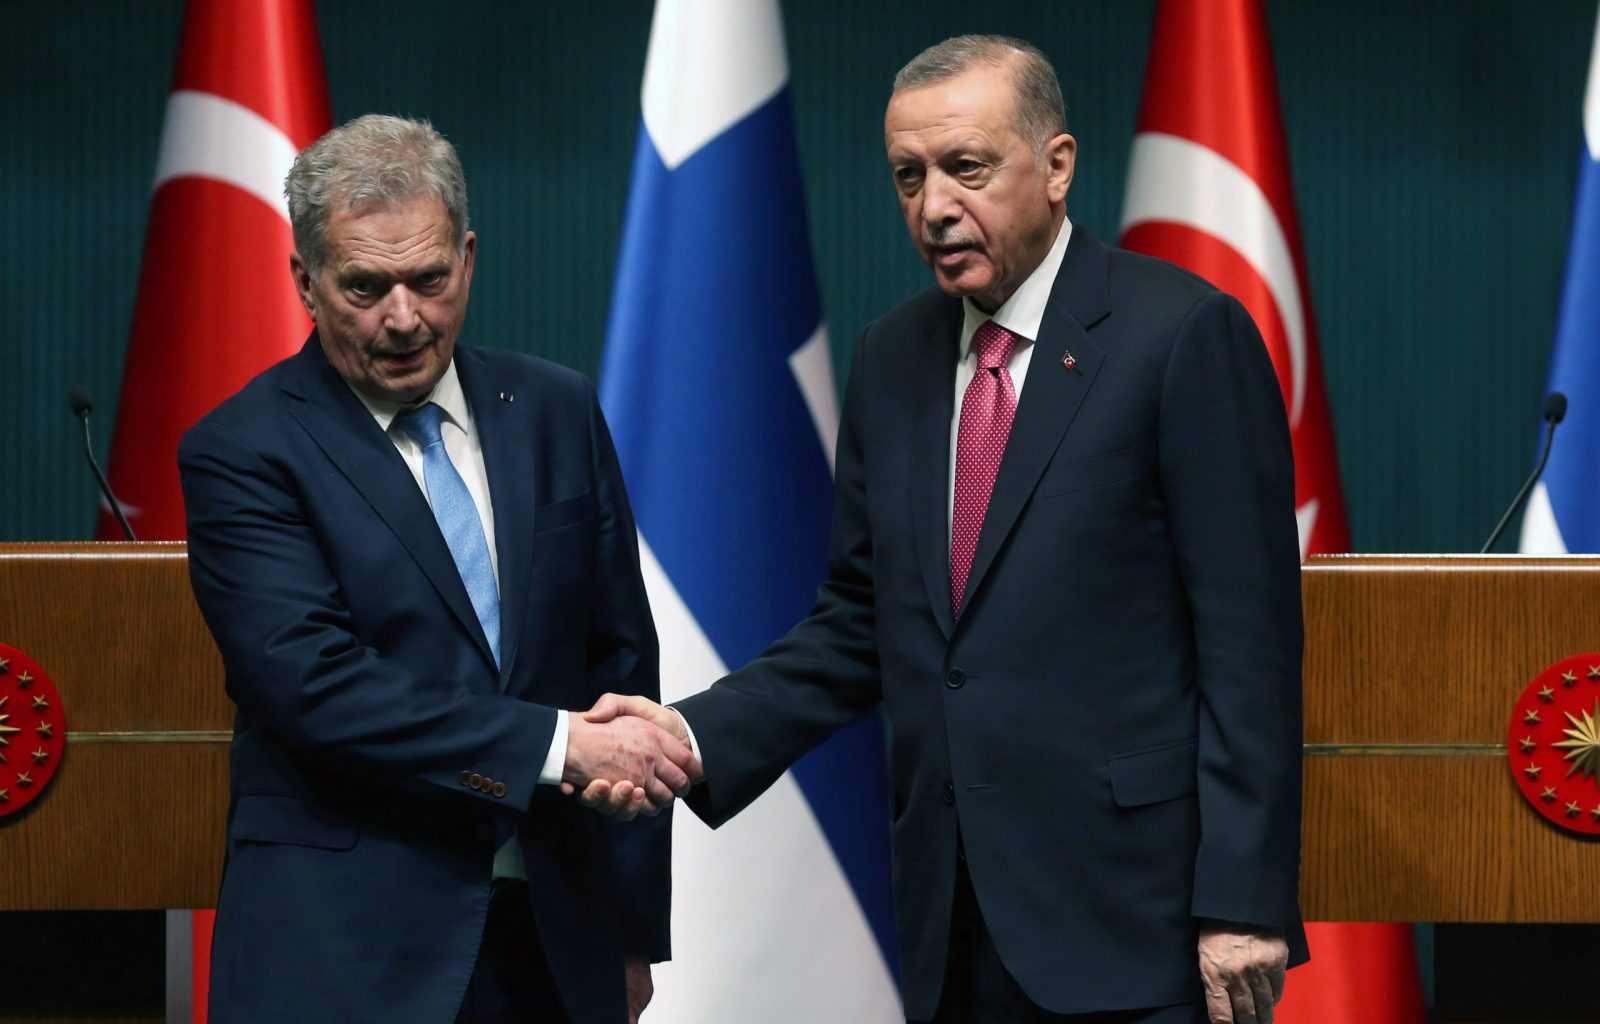 epa10528603 Finland's President Sauli Niinisto (L) and Turkish President Recep Tayyip Erdogan attend a press conference after their meeting at the presidential palace in Ankara, Turkey, 17 March 2023. Niinisto is in Turkey for the talks of Turkey's ratifying Finland’s NATO membership bid. Following Russia's invasion of Ukraine in May 2022, Finland and Sweden submitted applications to join NATO.  EPA/NECATI SAVAS